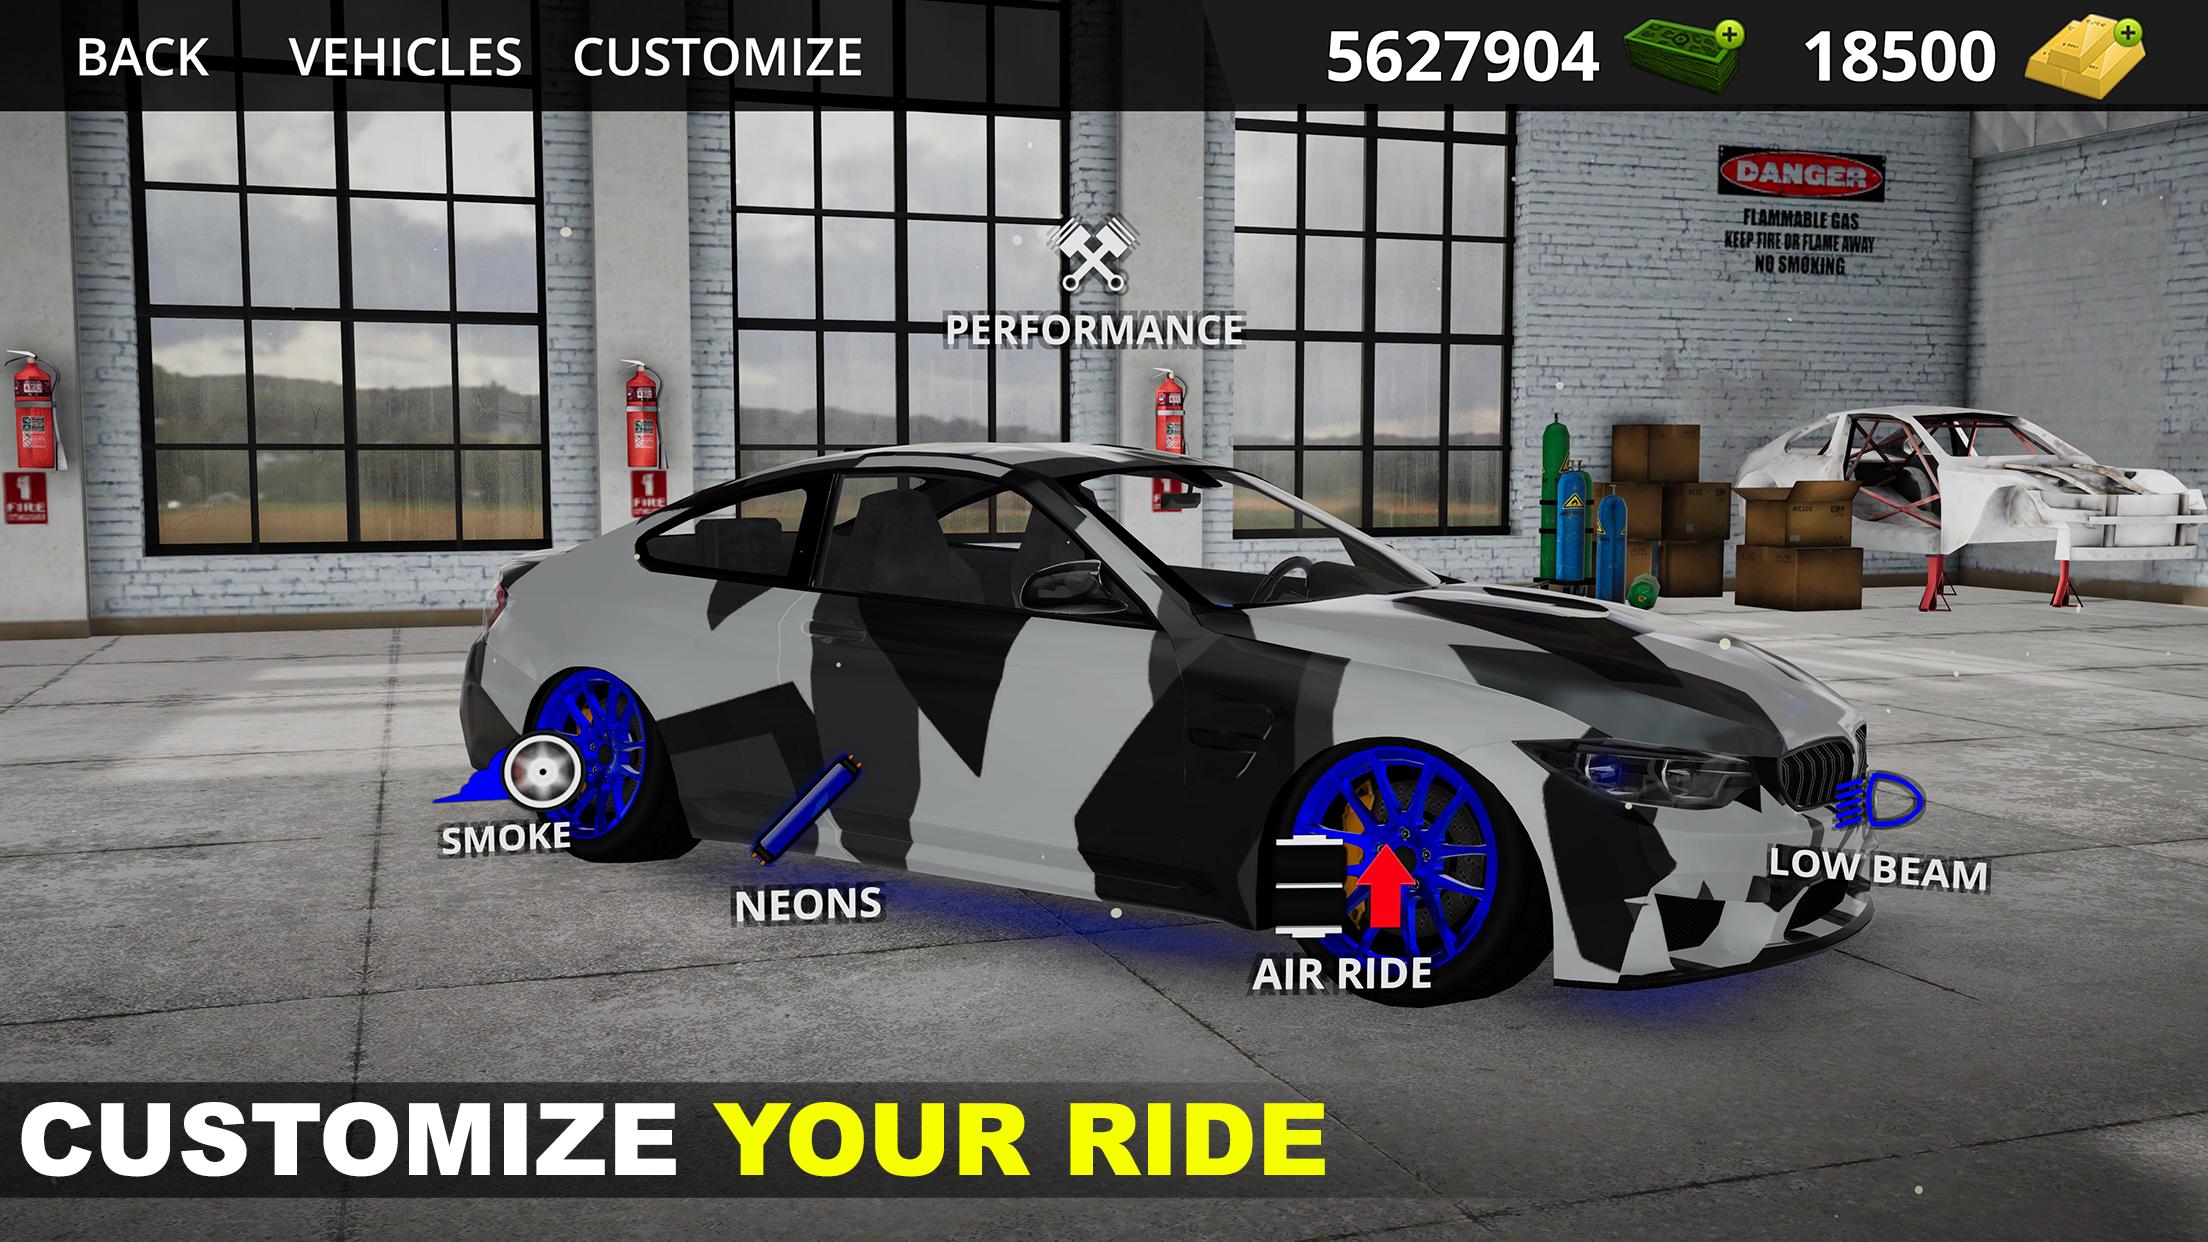 petrolhead paradise for android apk download